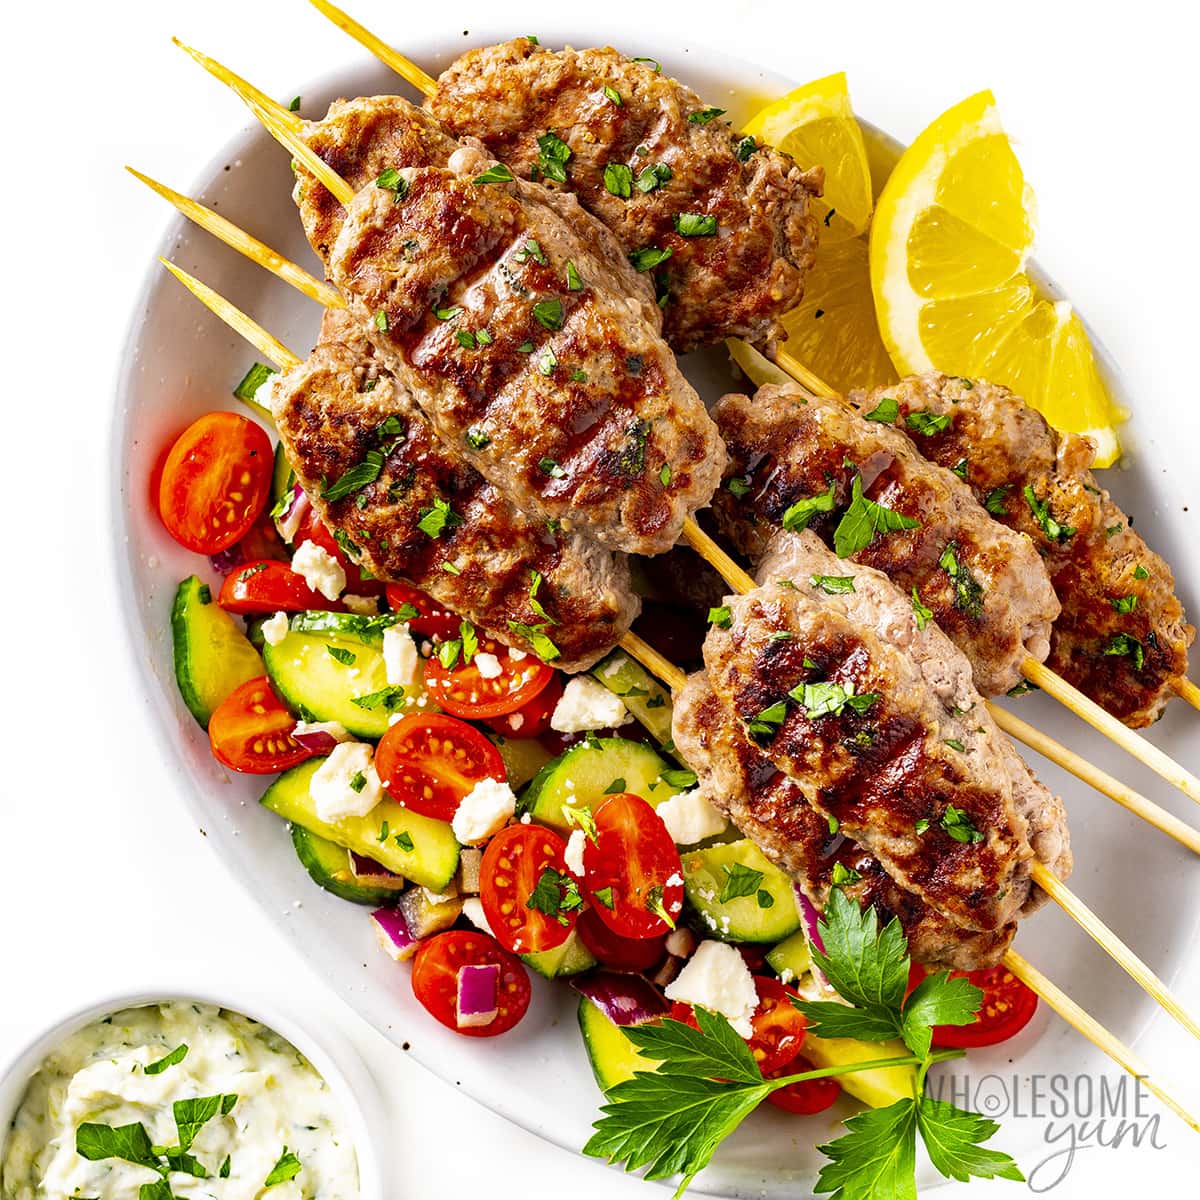 Grilled kebabs, cucumber tomato salad, and tzatziki sauce are presented on a white platter, accented with lemon wedges and herbs.